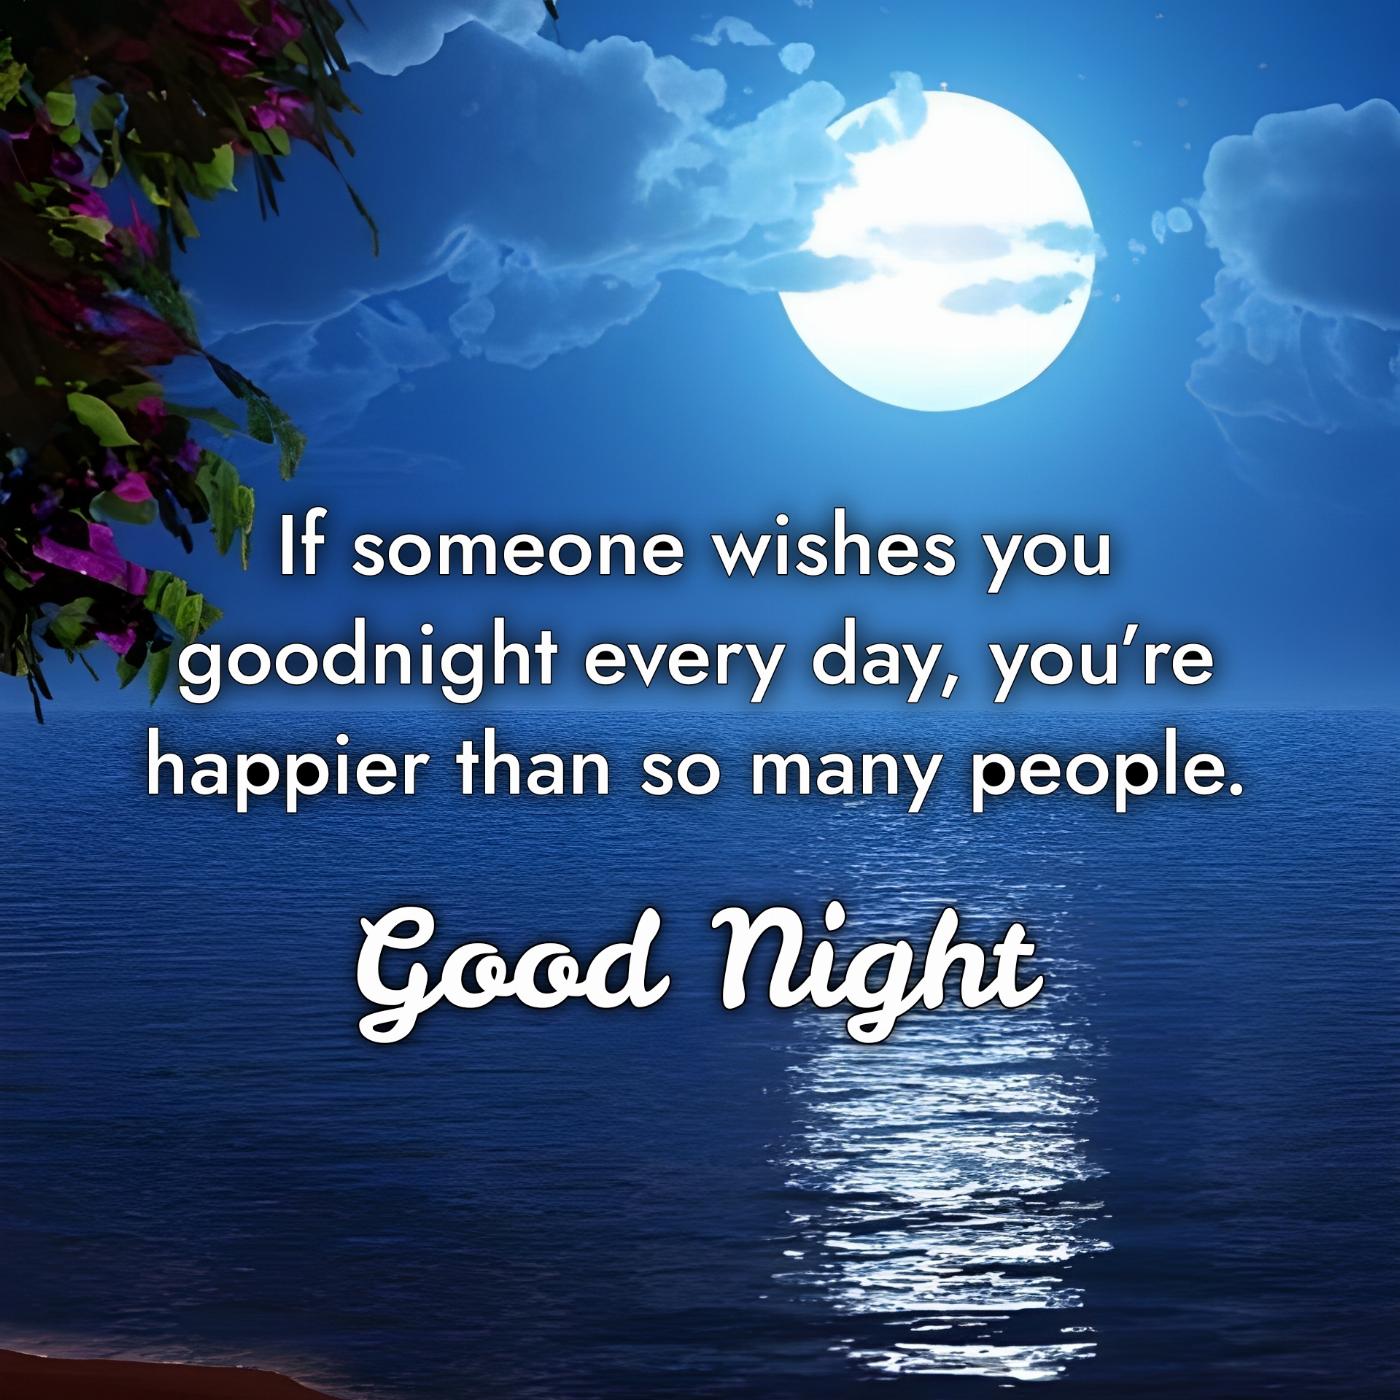 If someone wishes you goodnight every day